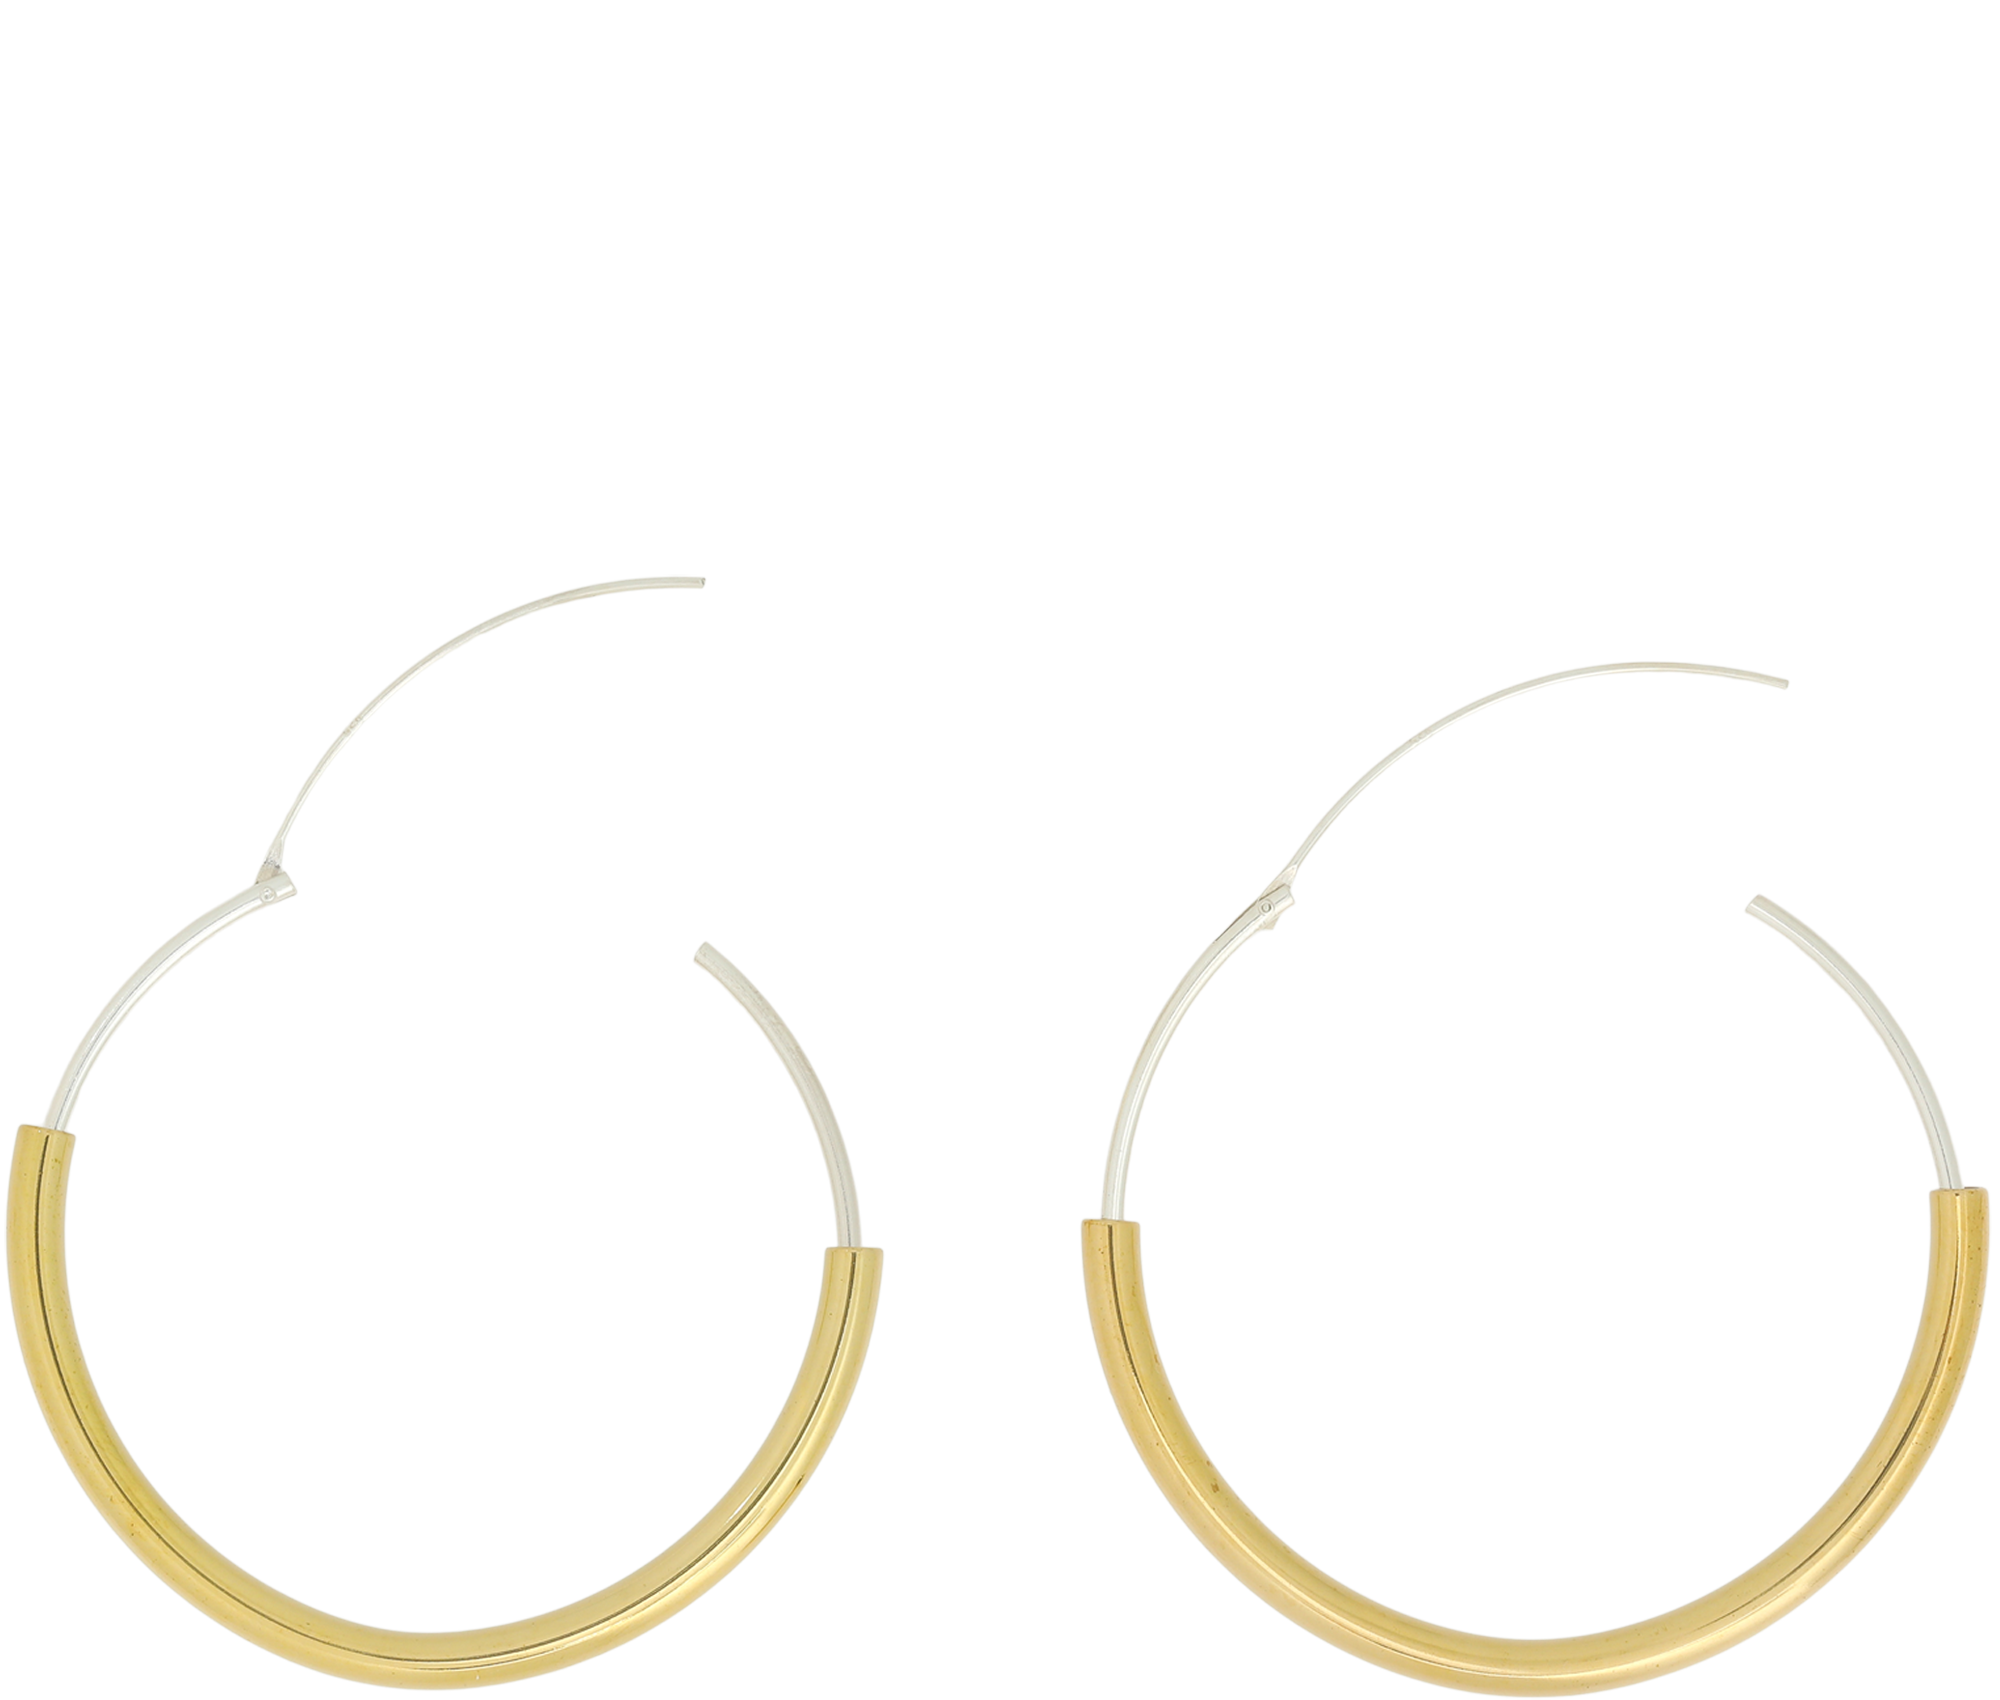 Sustainable Gold and Silver Hoops - Keentu